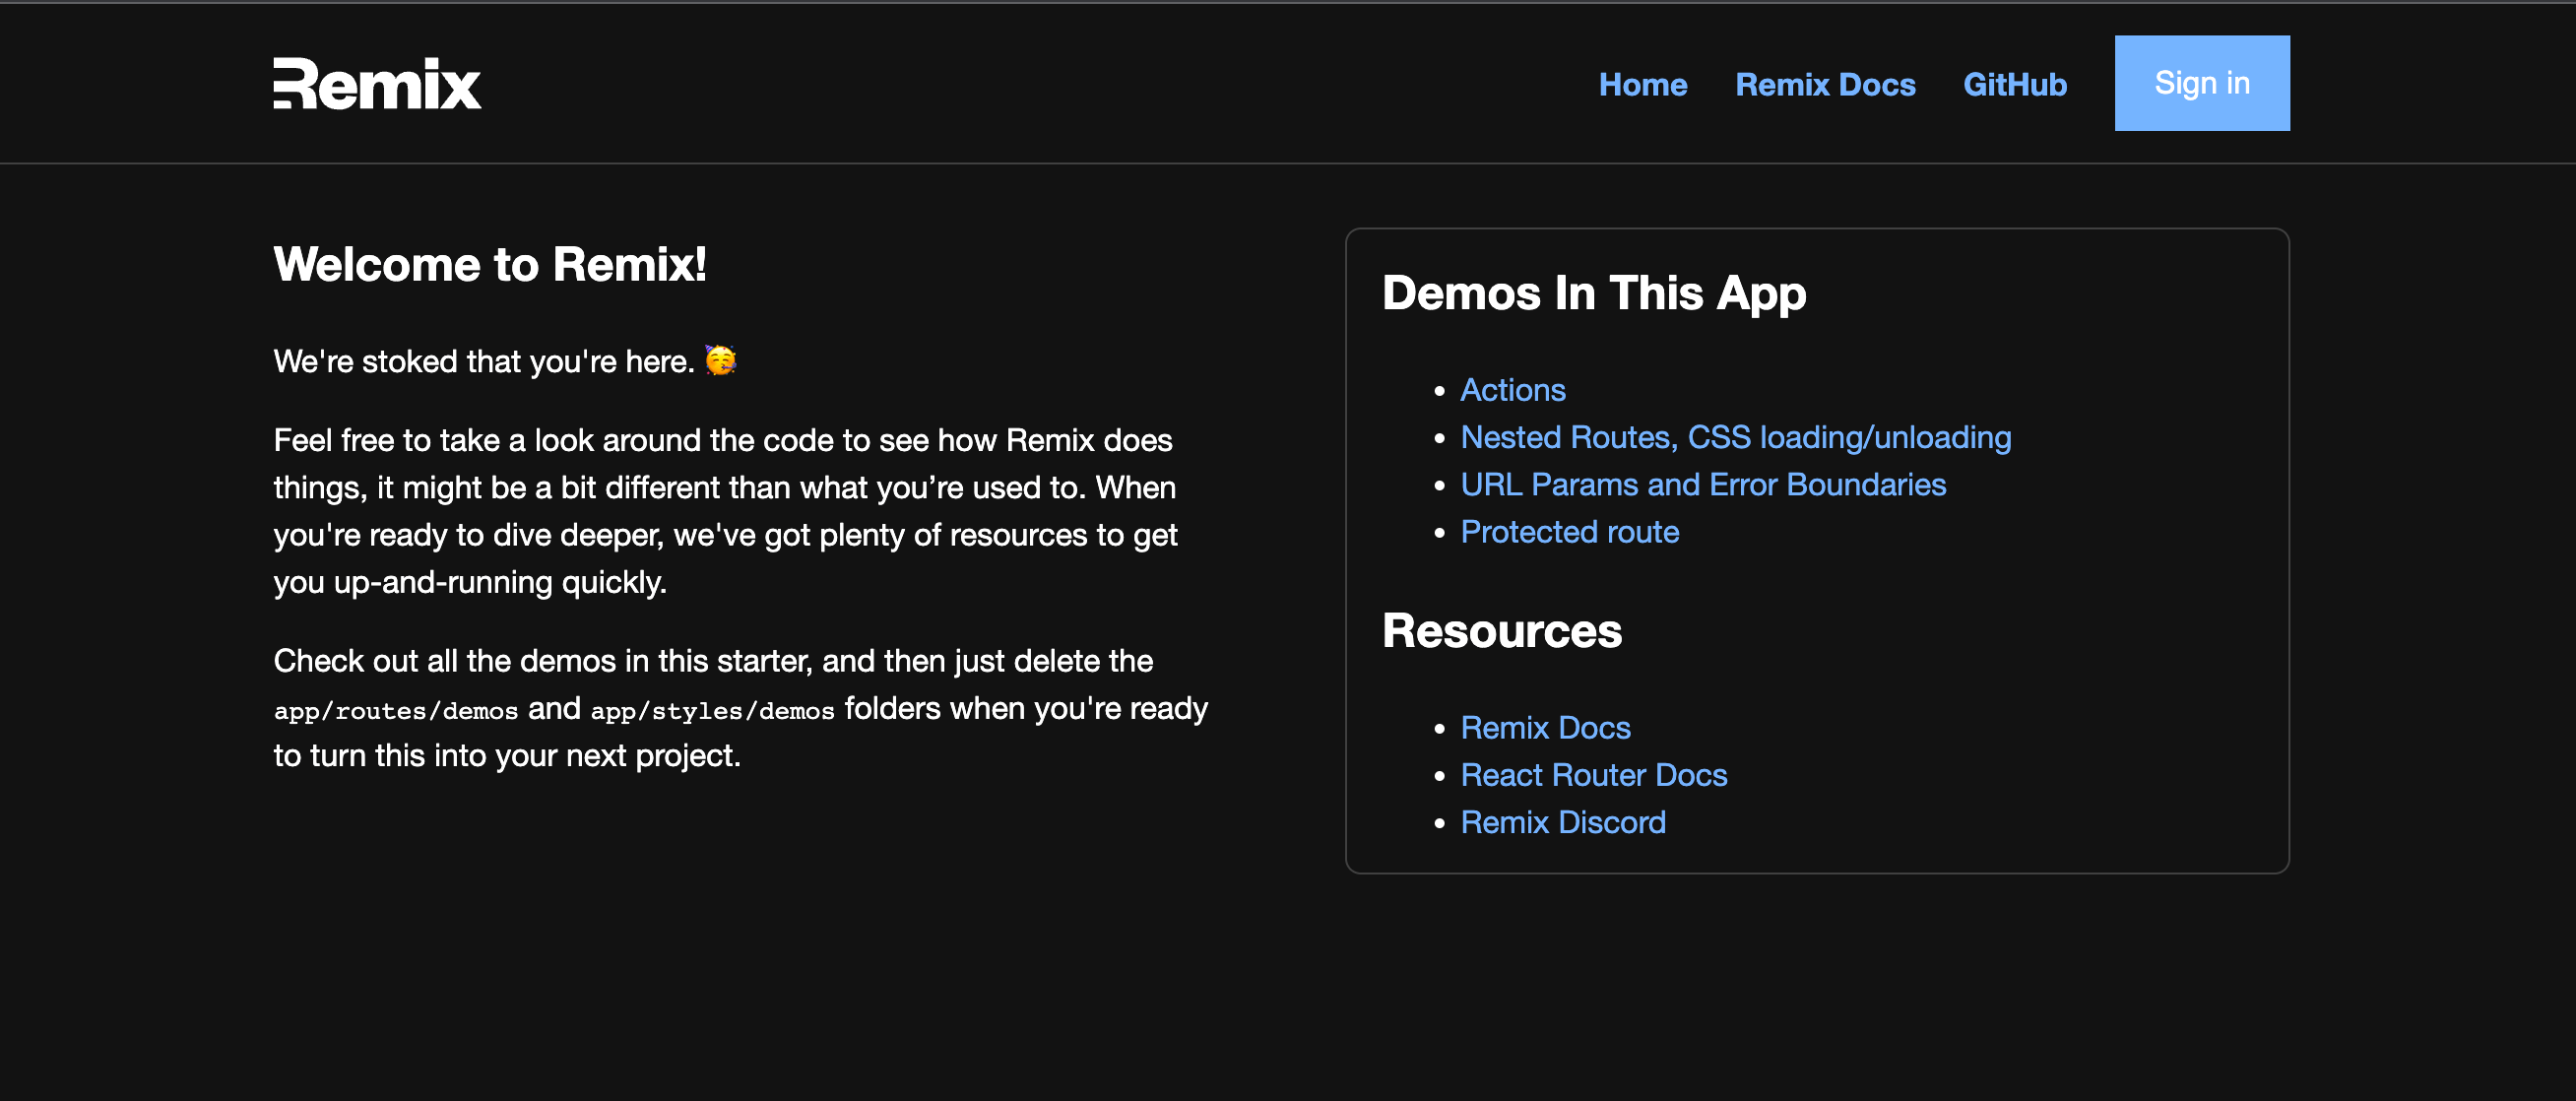 Remix sample app has a welcome to remix message, list of demos in this app, list of resources. The nav bar has home, Remix Docs, GitHub, and a Sign in button